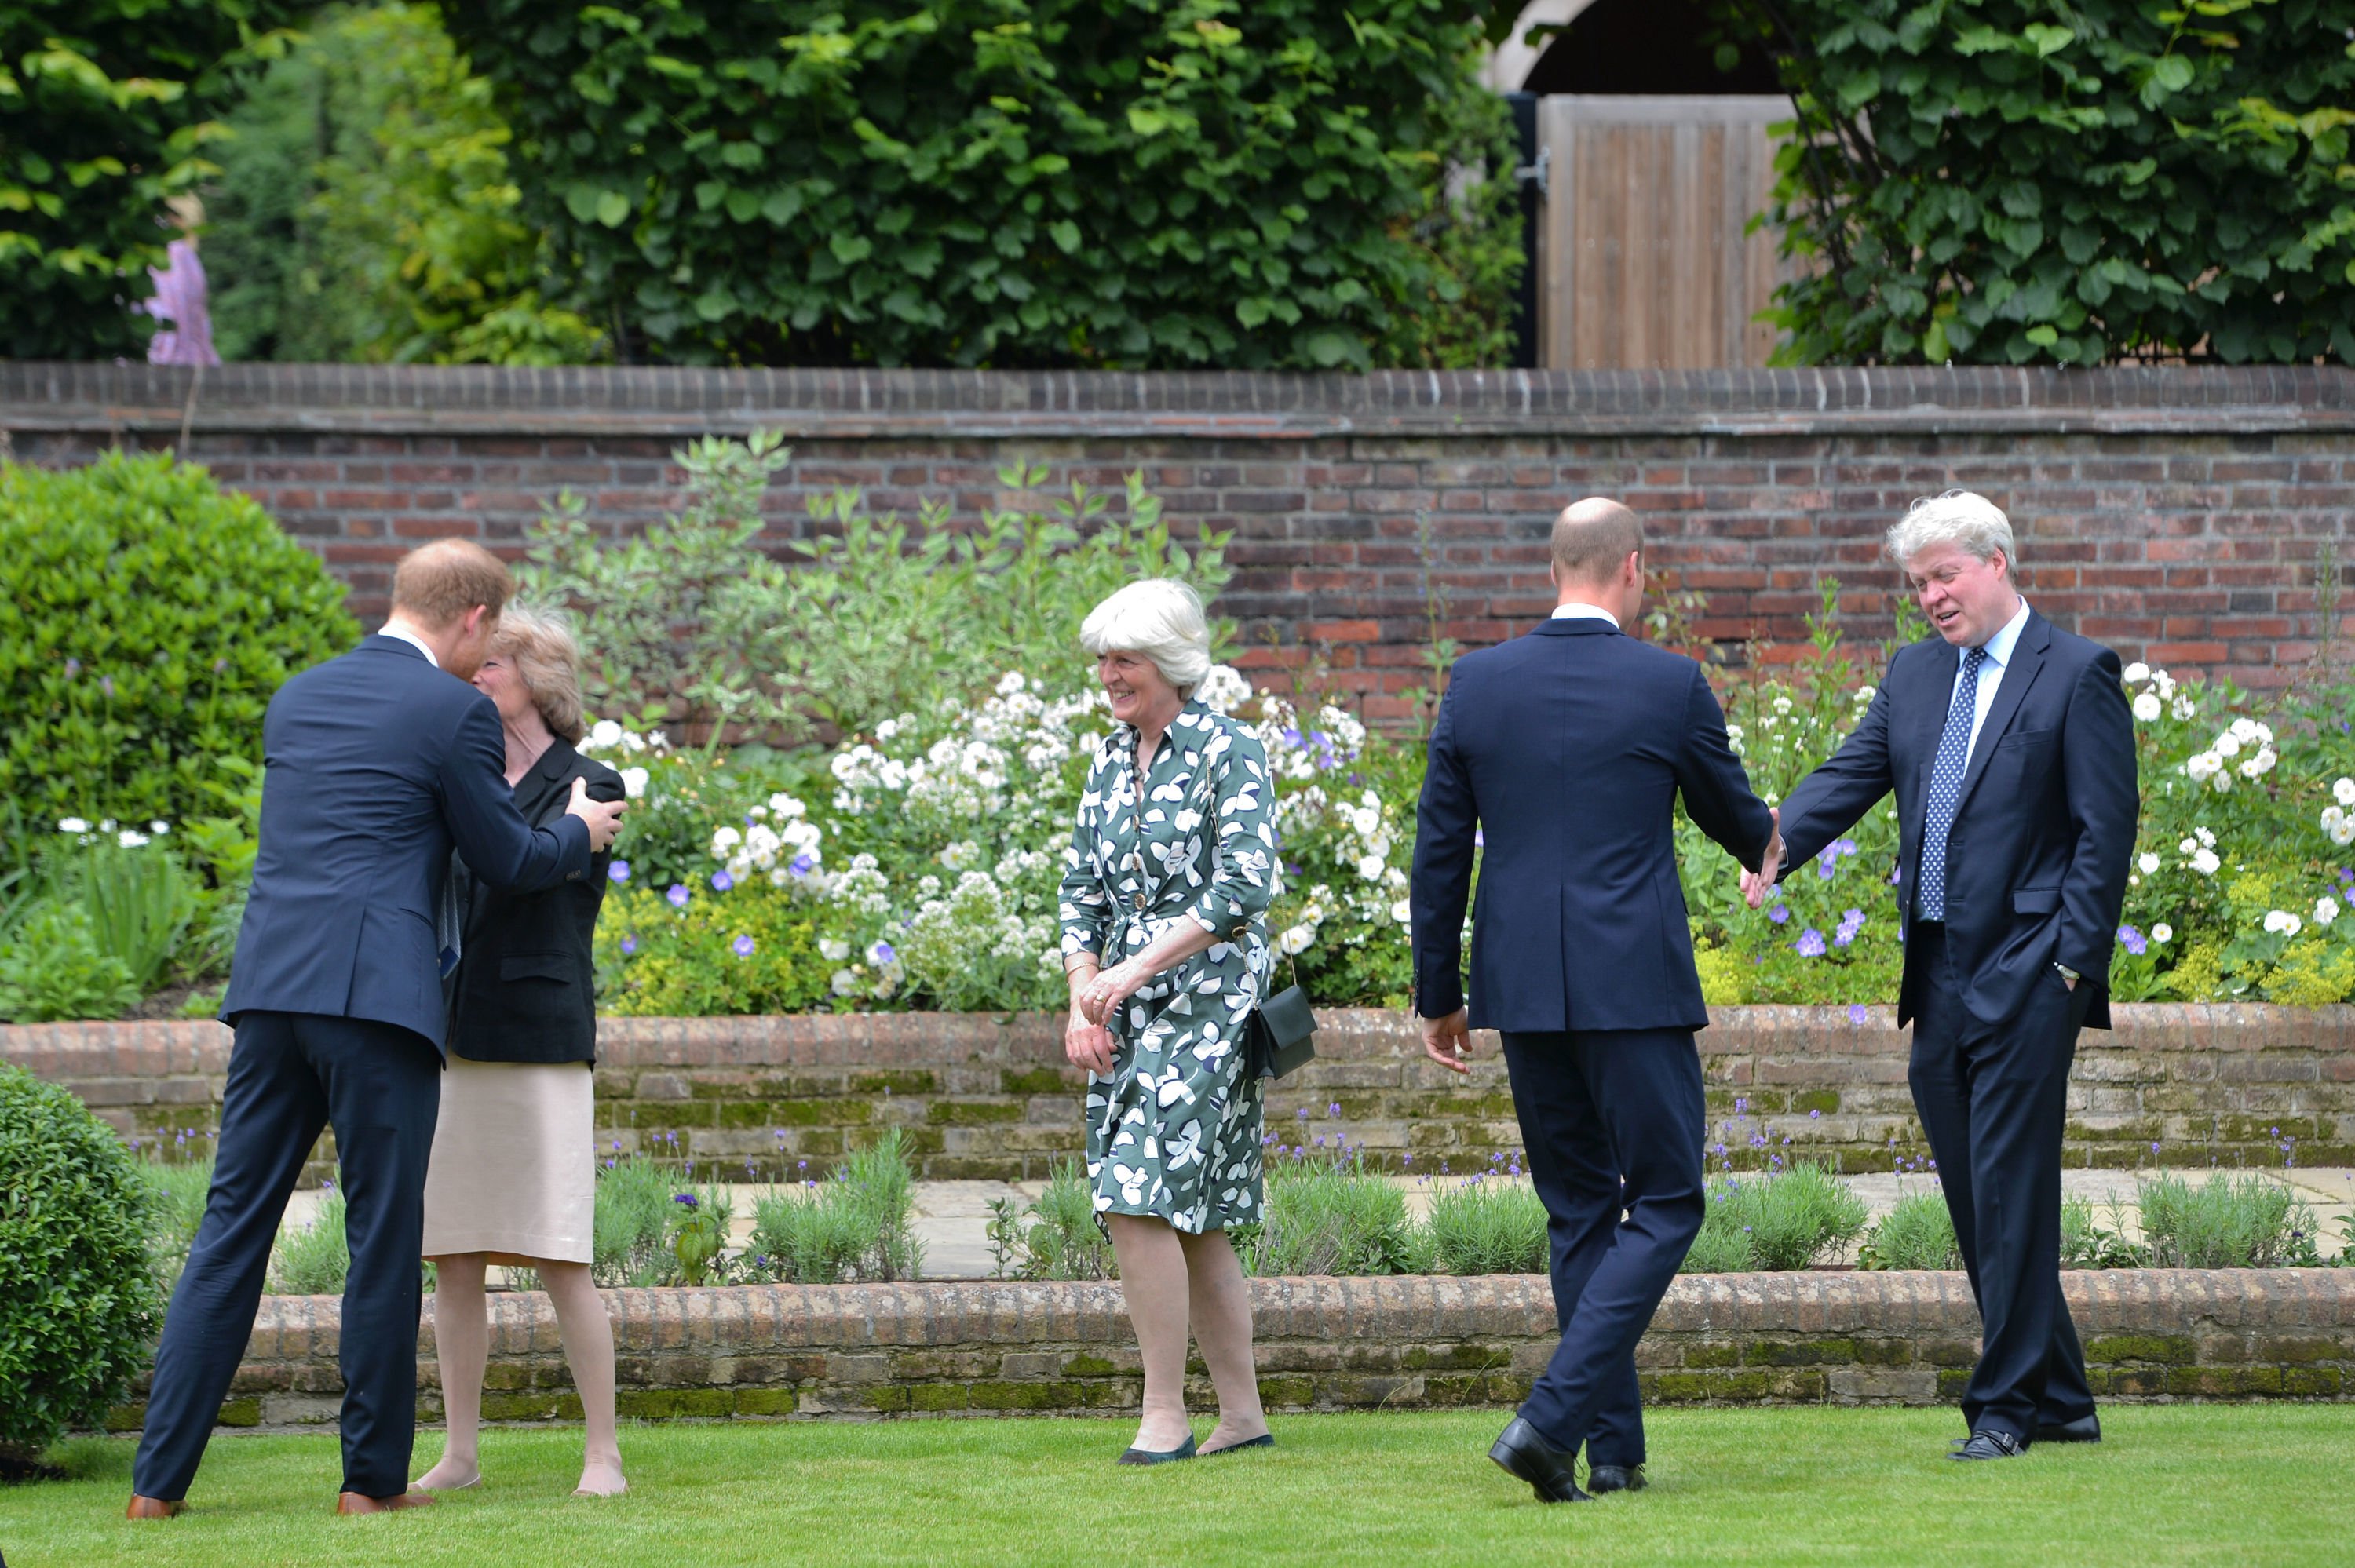 Prince Harry, and Prince William, greet Princess Diana's siblings Lady Sarah McCorquodale, Lady Jane Fellowes, and Earl Spencer at statue unveiling